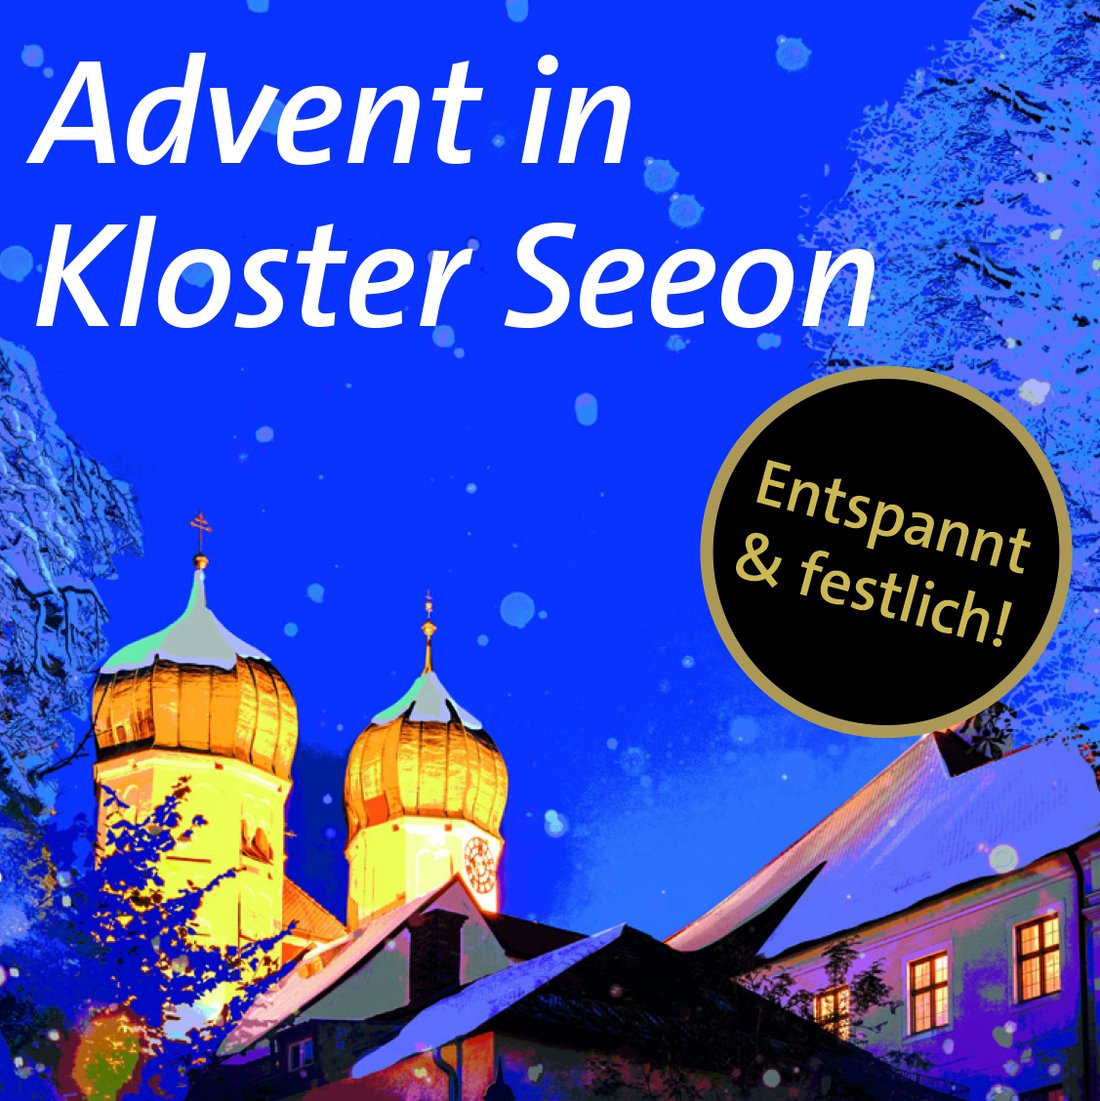 seeon_advent_dinlang_221111_1500-003-1-002_2